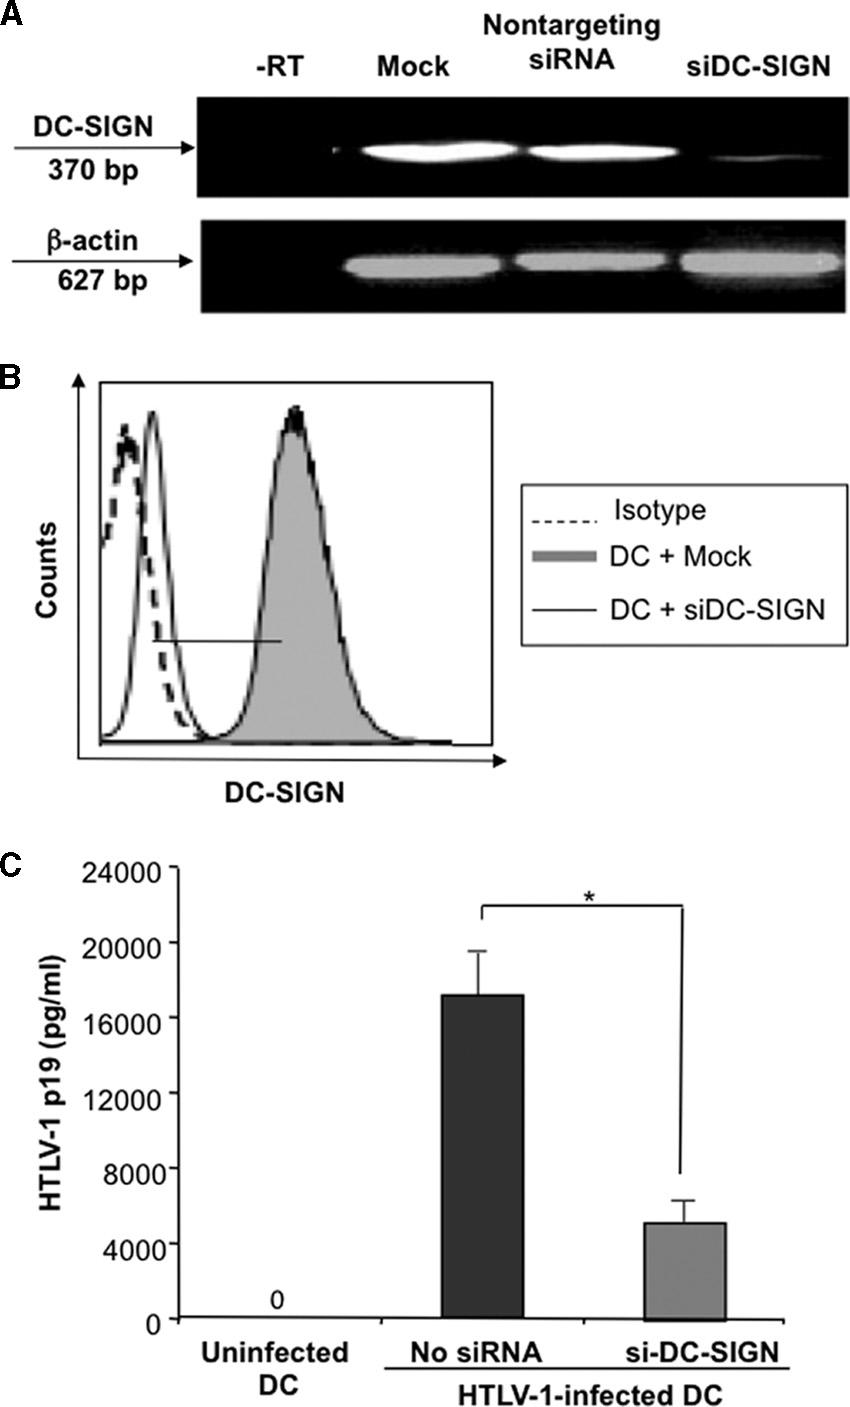 VOL. 83, 2009 DC-SIGN-MEDIATED HTLV-1 TRANSMISSION AND INFECTION 10917 FIG. 7. Silencing of DC-SIGN expression inhibits HTLV-1 infection of DCs.